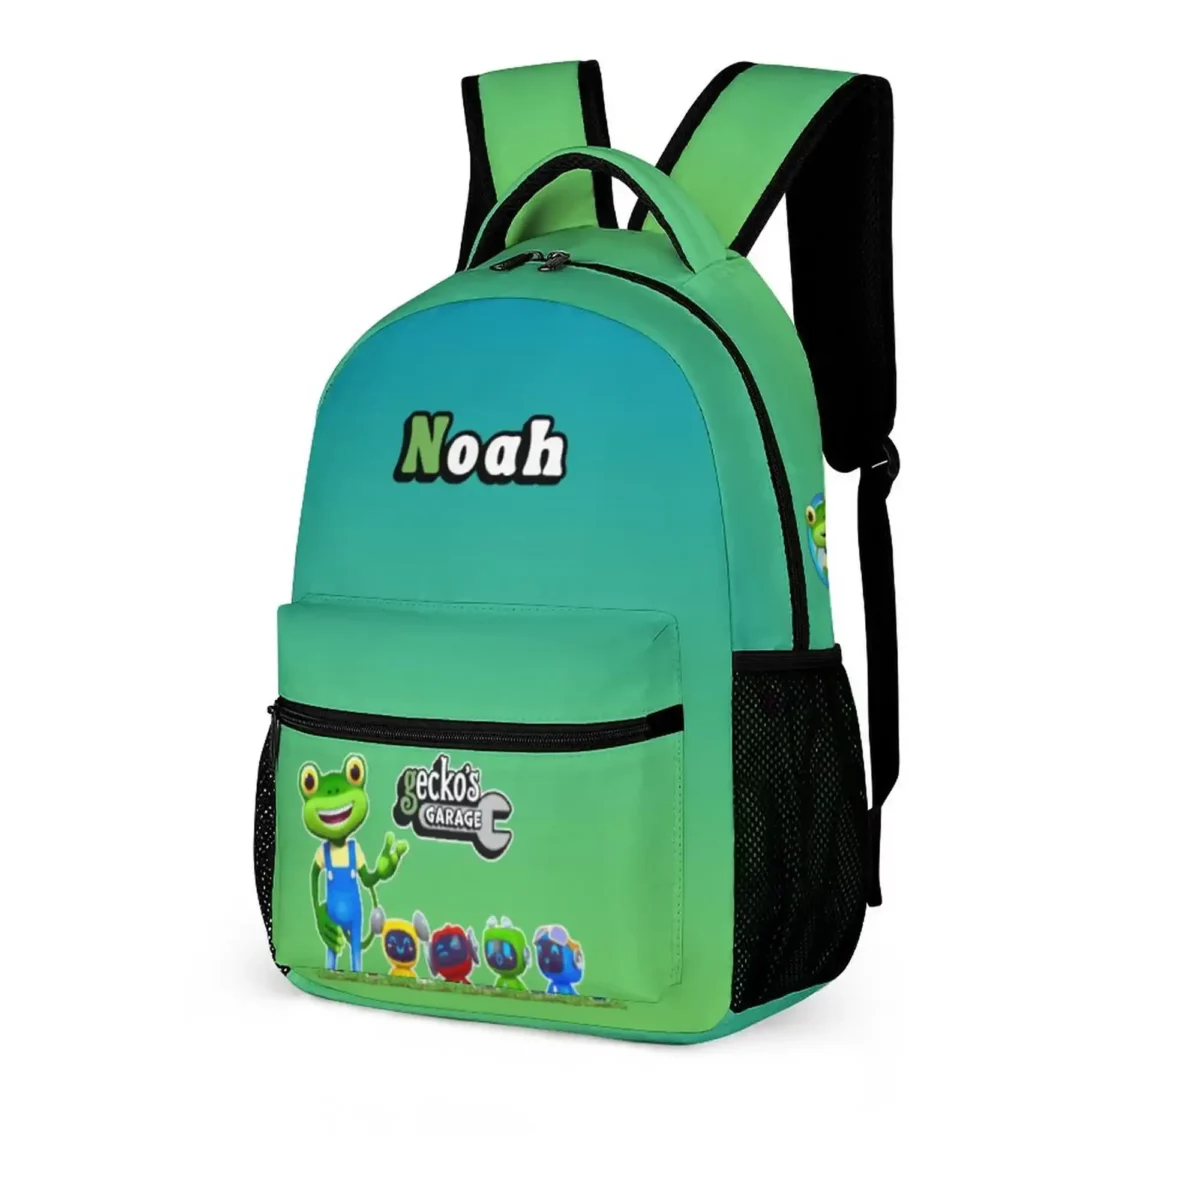 Green Gecko’s Garage Backpack with characters on front pocket Cool Kiddo 12